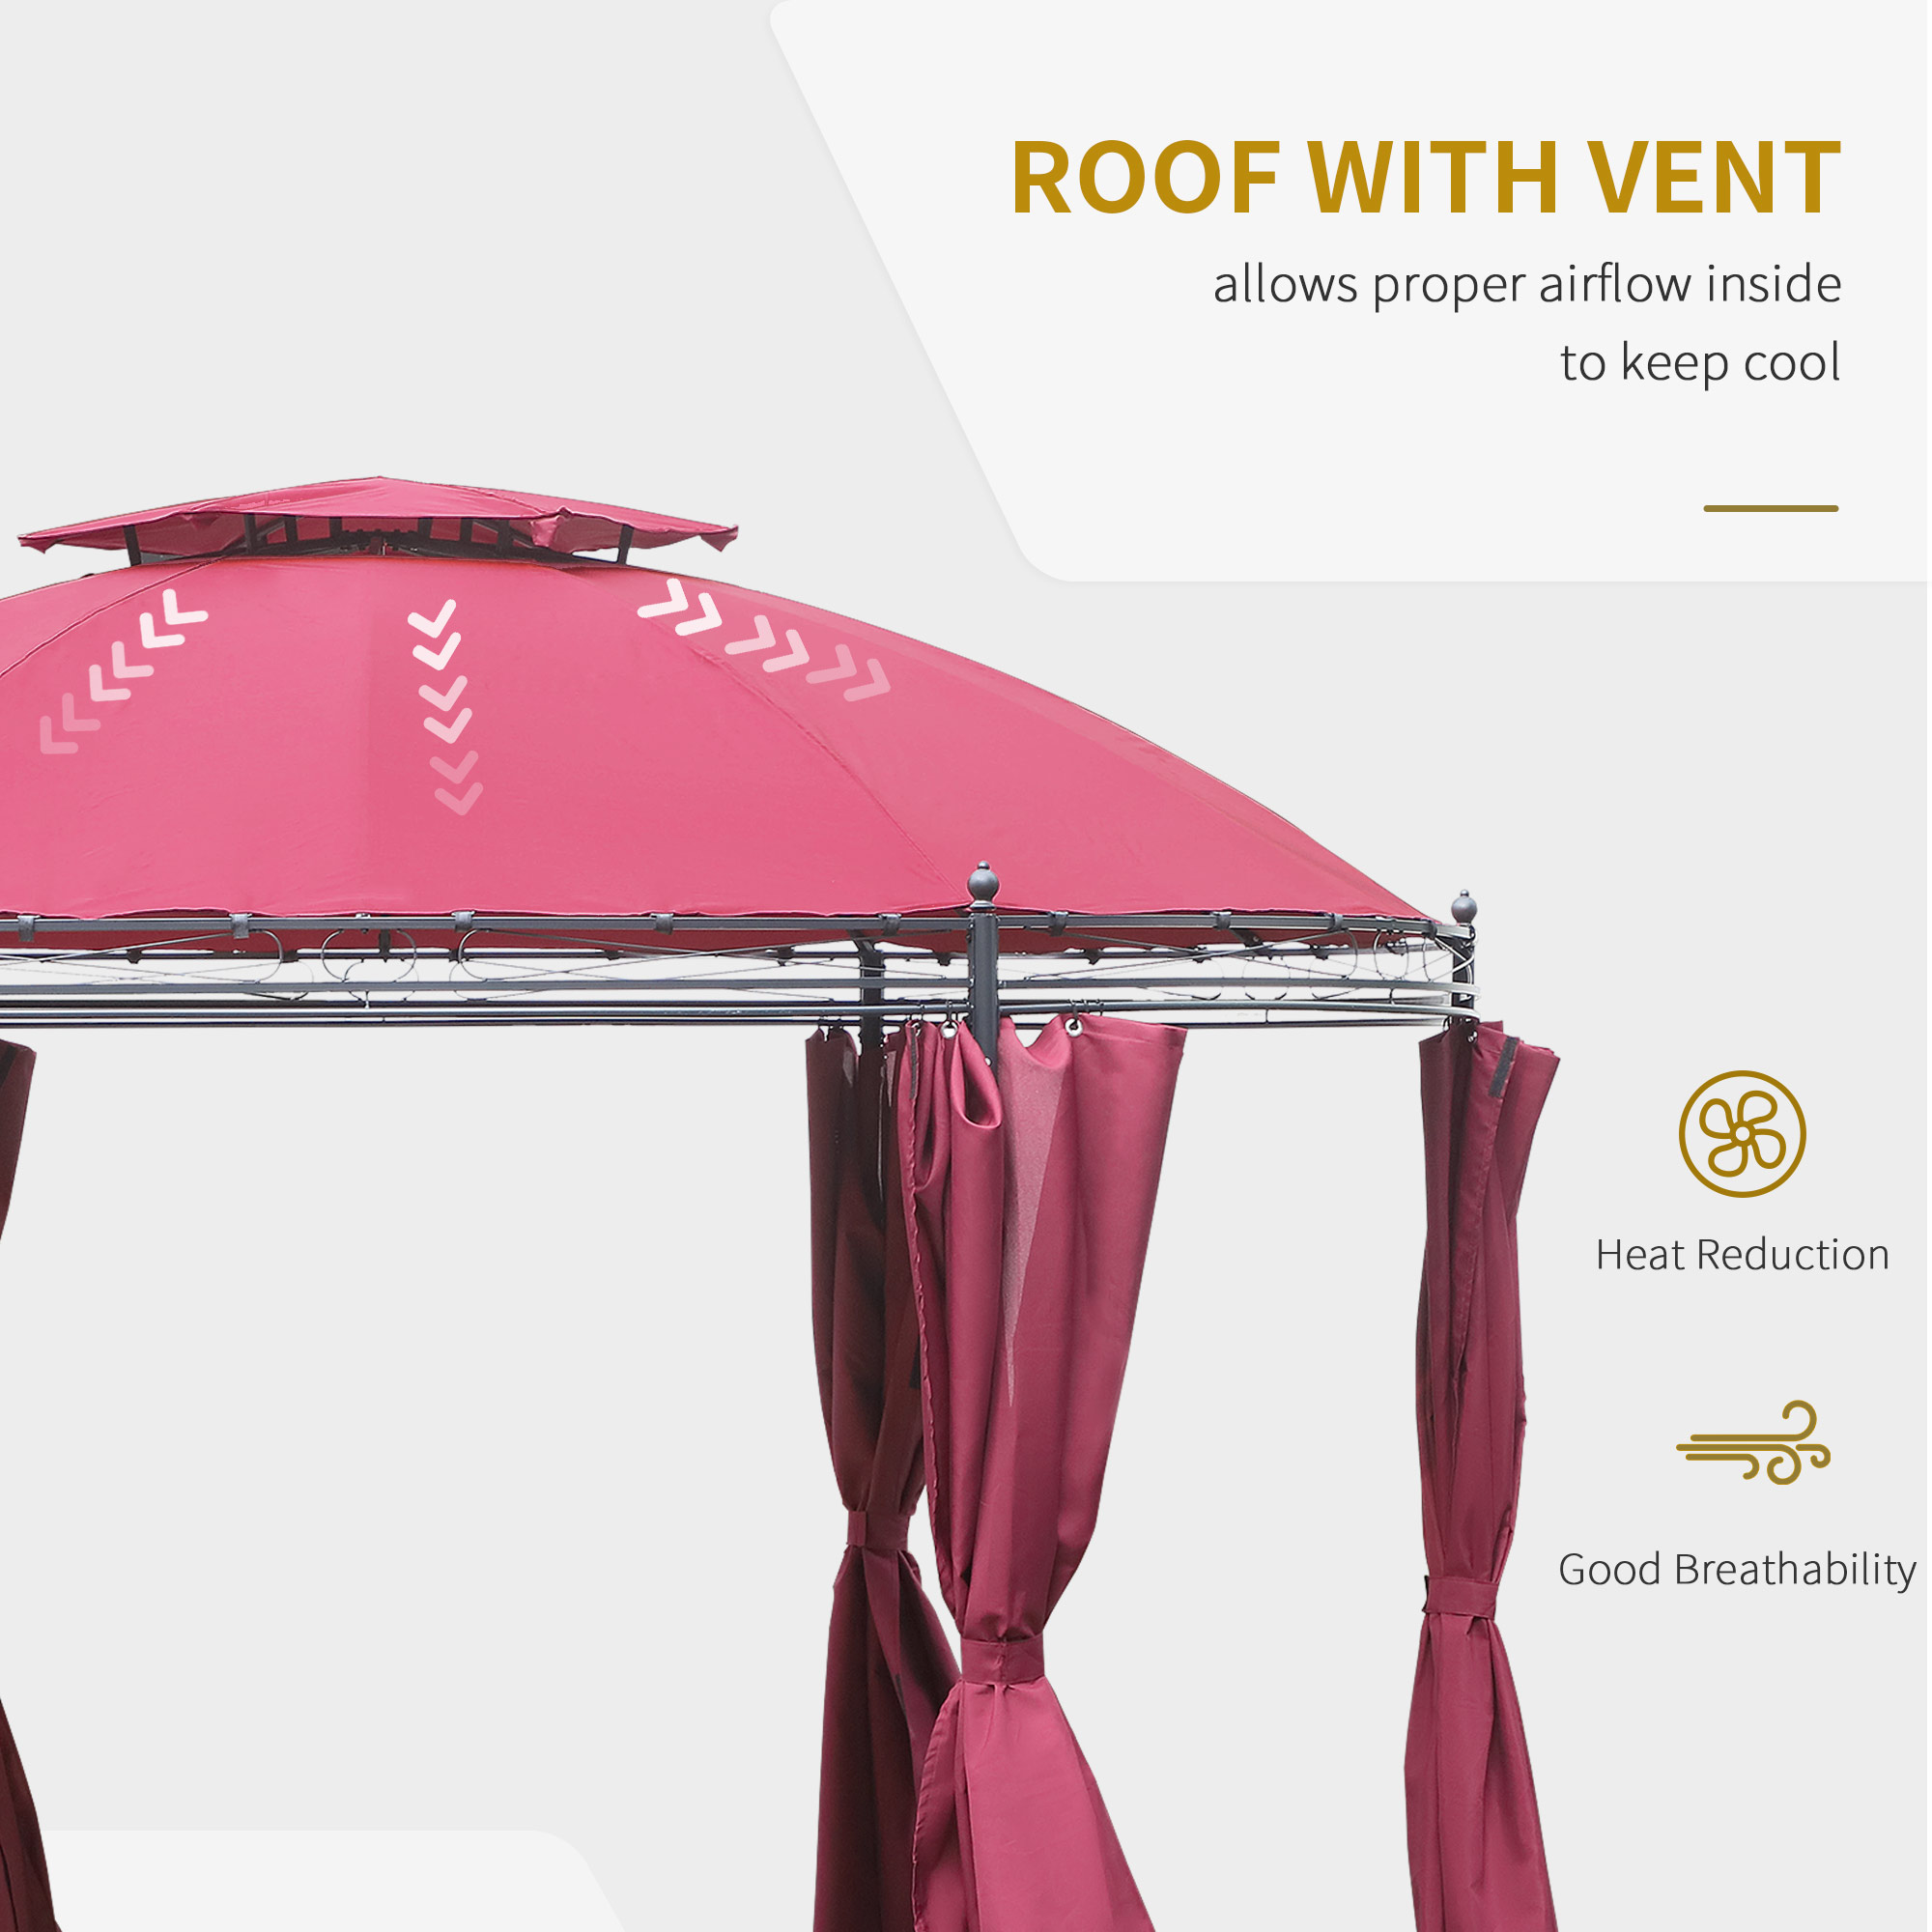 OutsunnyÂ 11.5' Patio Gazebo, Outdoor Gazebo Canopy Shelter with Curtains, Romantic Round Double Roof, Solid Steel Frame for Garden, Lawn, Backyard and Deck, Wine Red - image 3 of 9